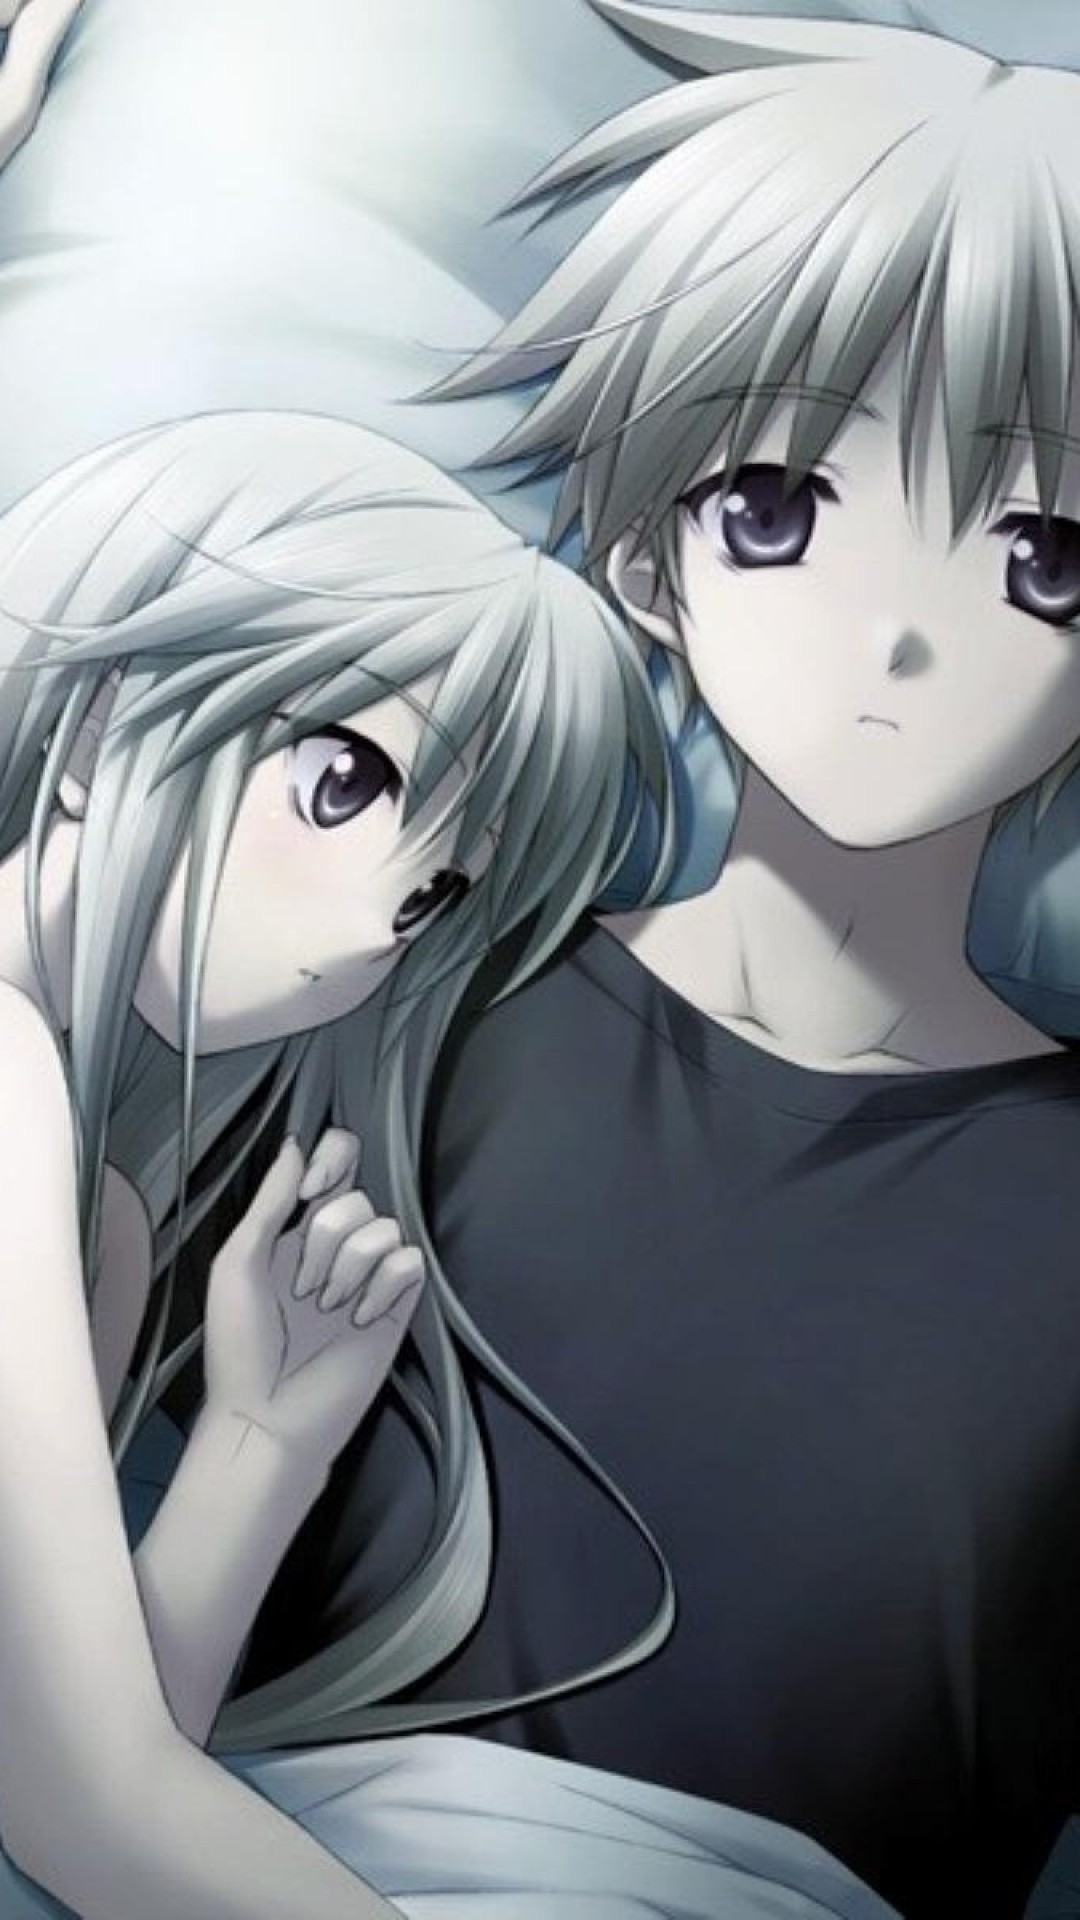 Download wallpaper 240x320 couple kiss love romance anime old mobile  cell phone smartphone hd background